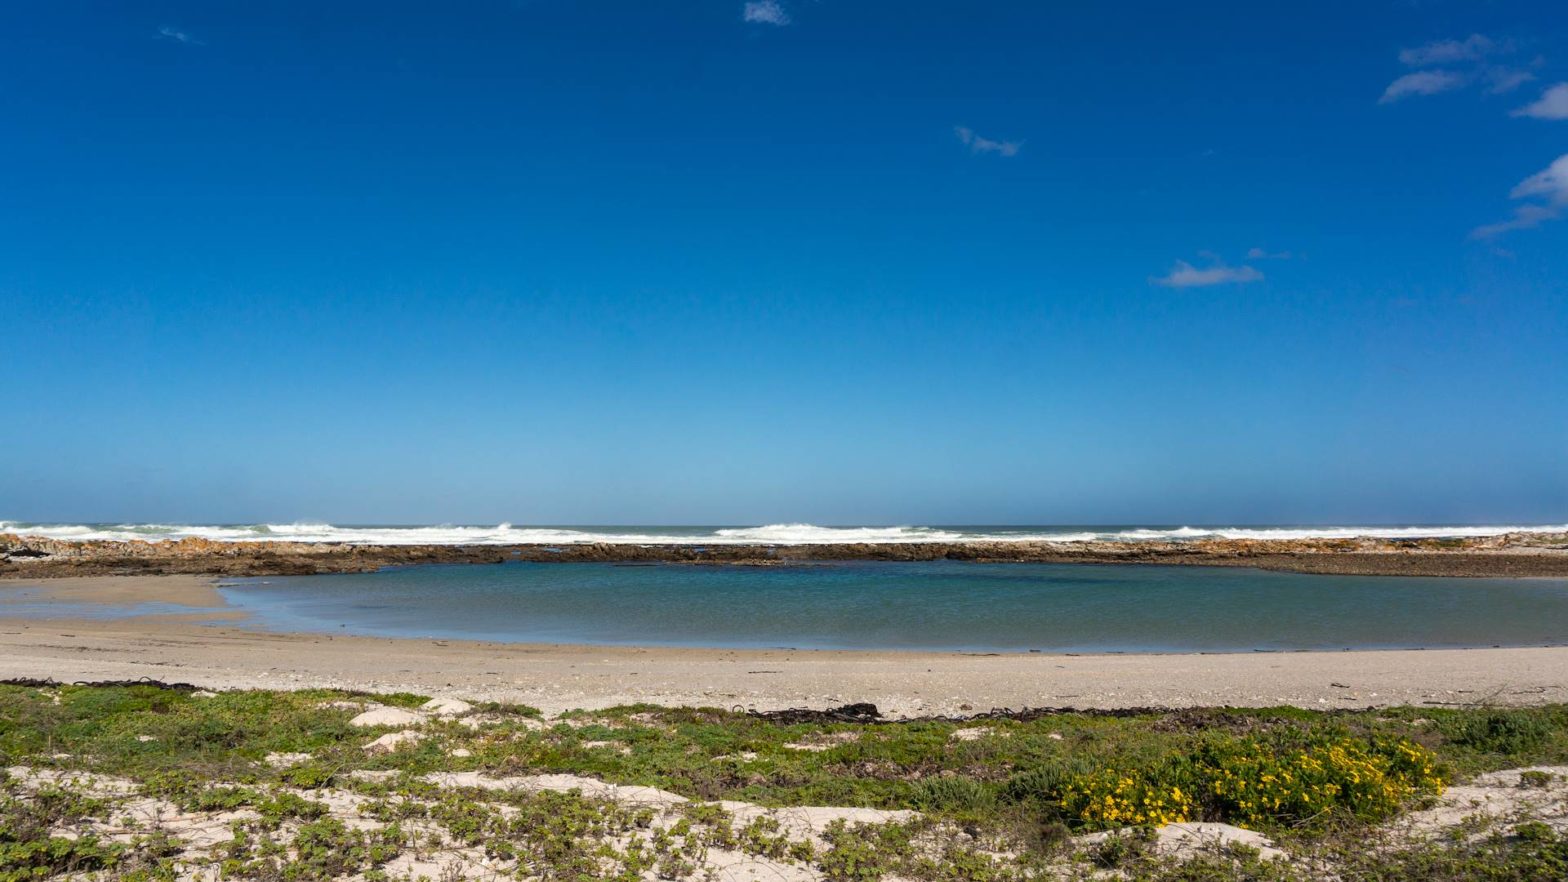 The lagoon at the start of the Agulhas hike.